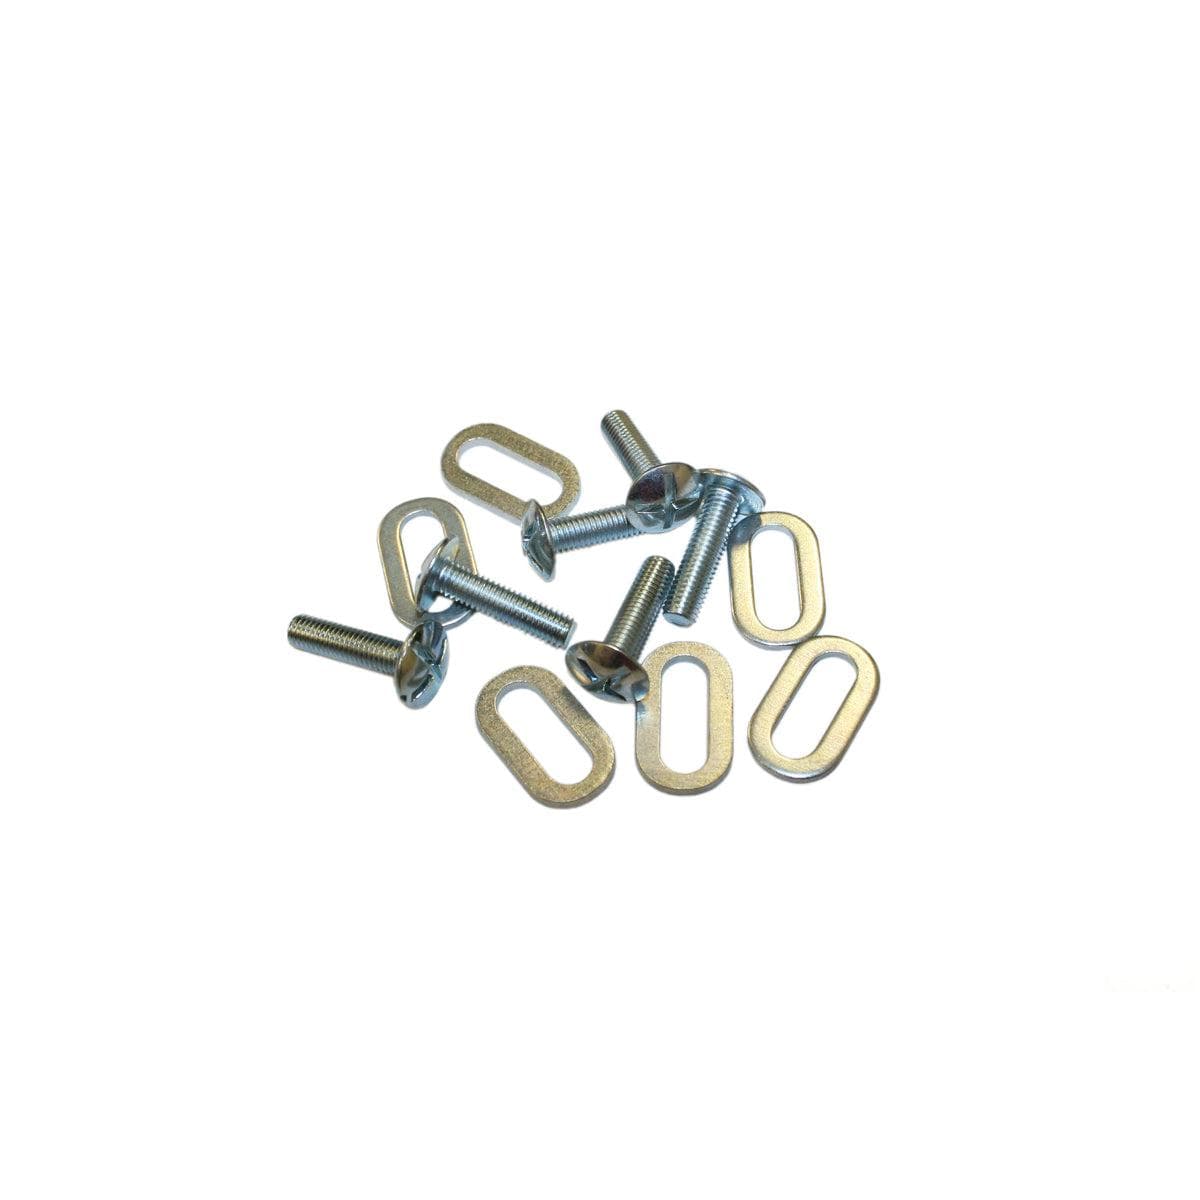 Look Spare - Keo Cleat Screws & Washers Extra Long 20Mm (6 Pcs):